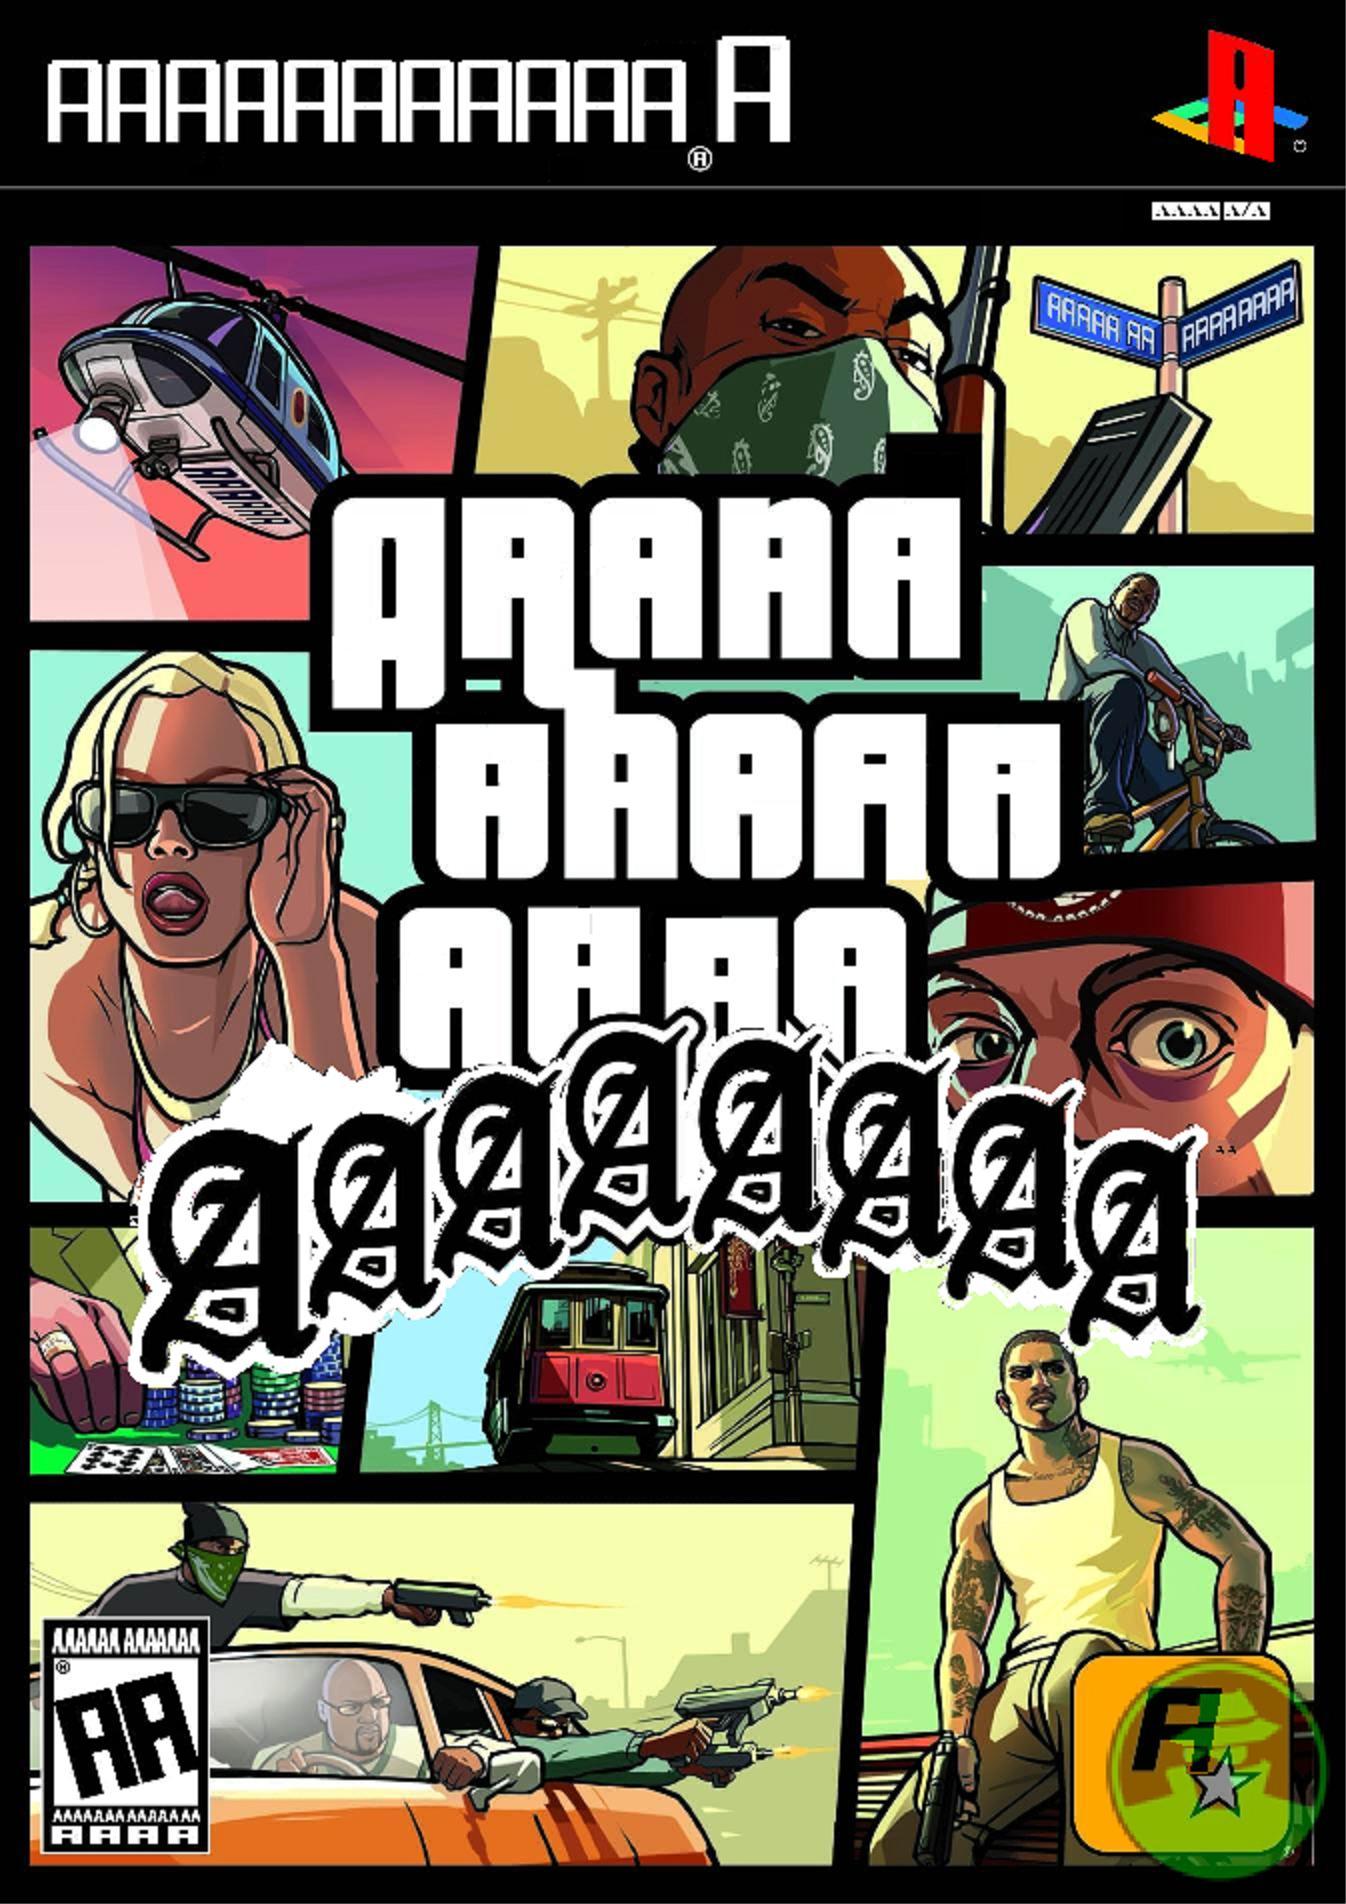 High Quality Grand Theft Auto Screaming Blank Meme Template